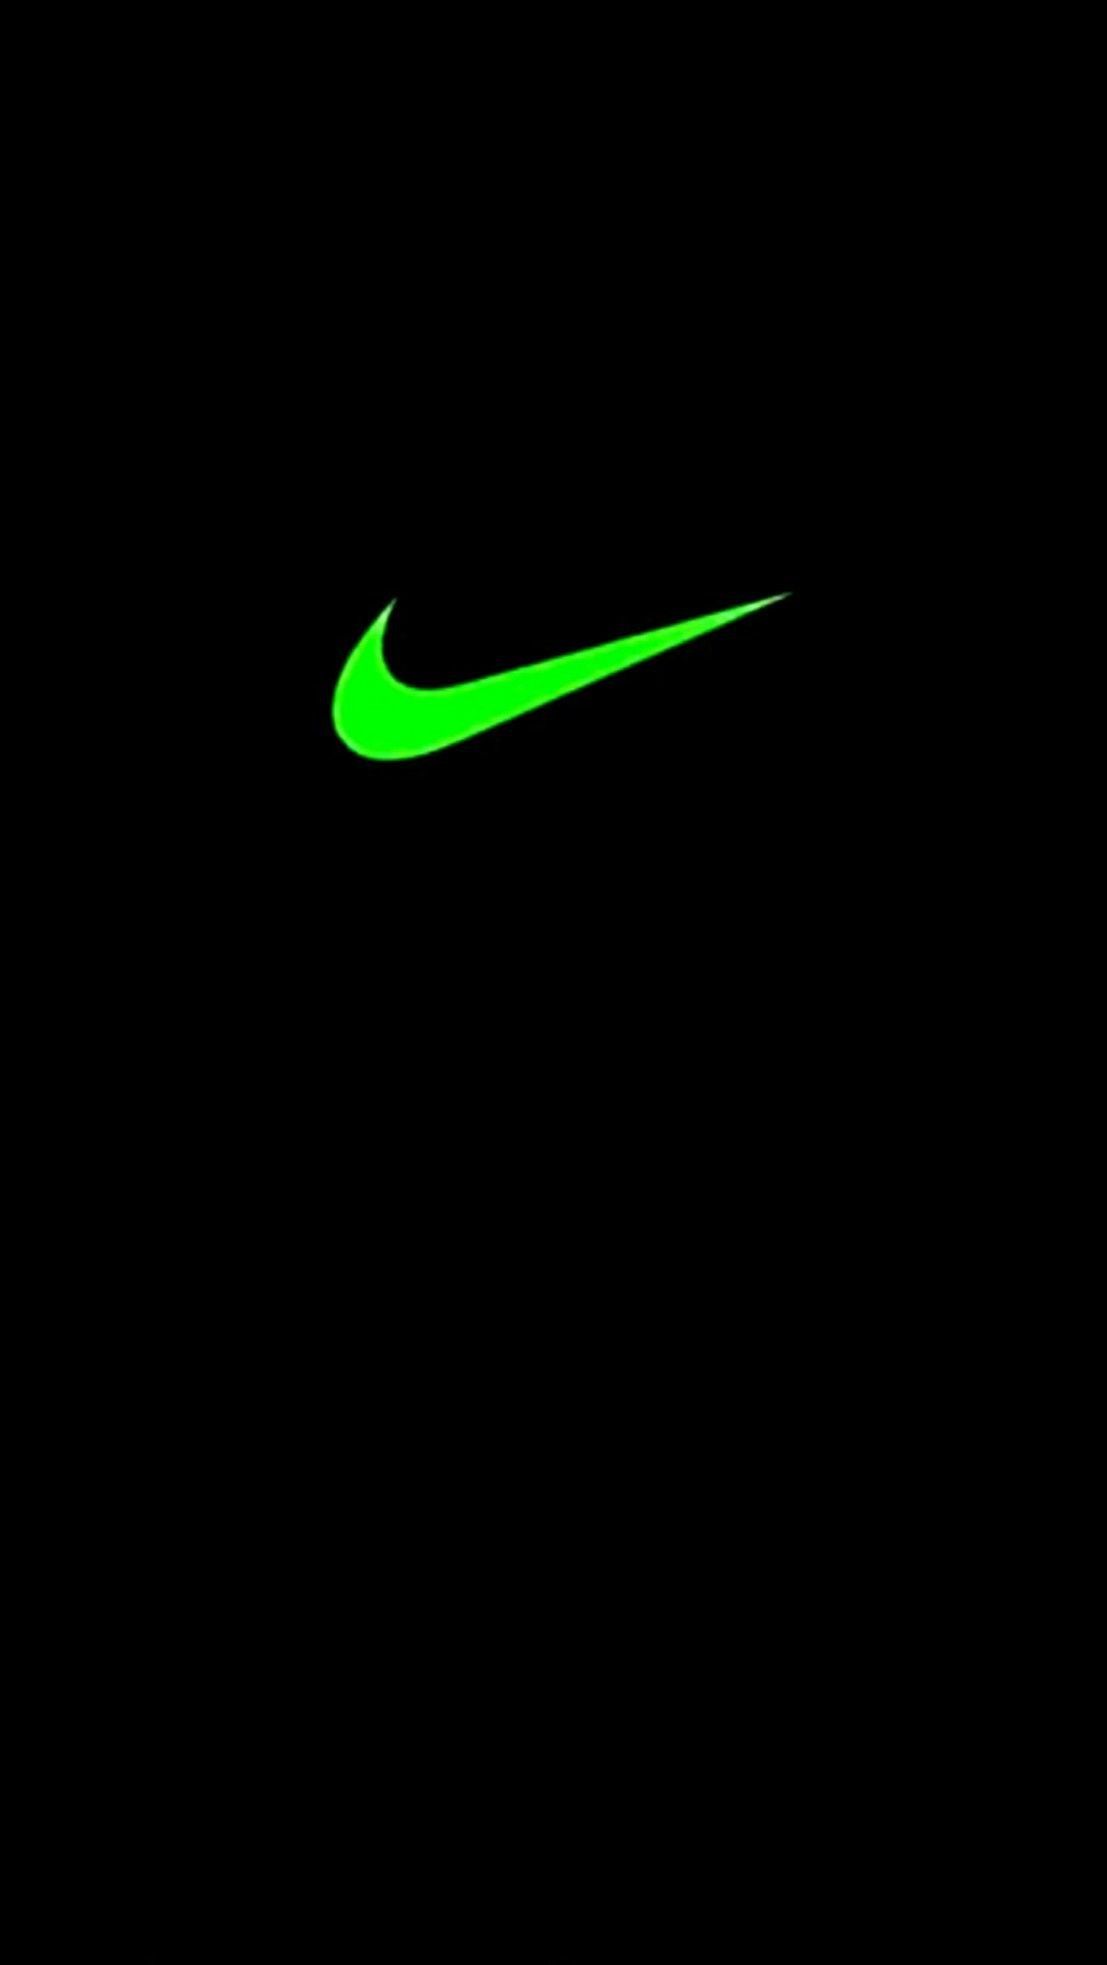 Neon Green And Black Wallpaper